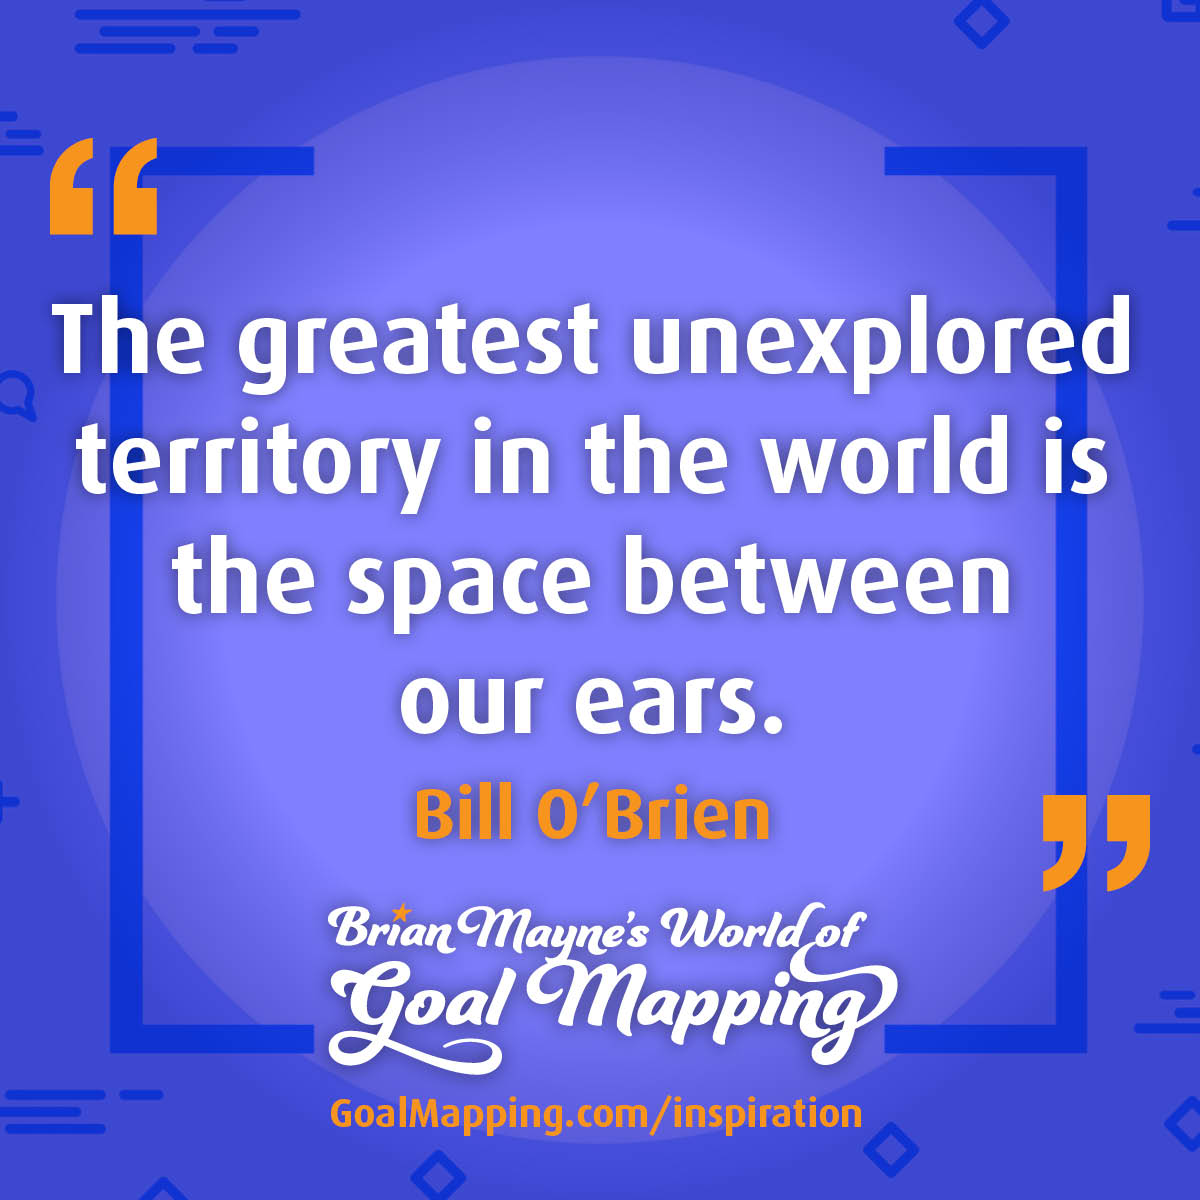 "The greatest unexplored territory in the world is the space between our ears." Bill O'Brien